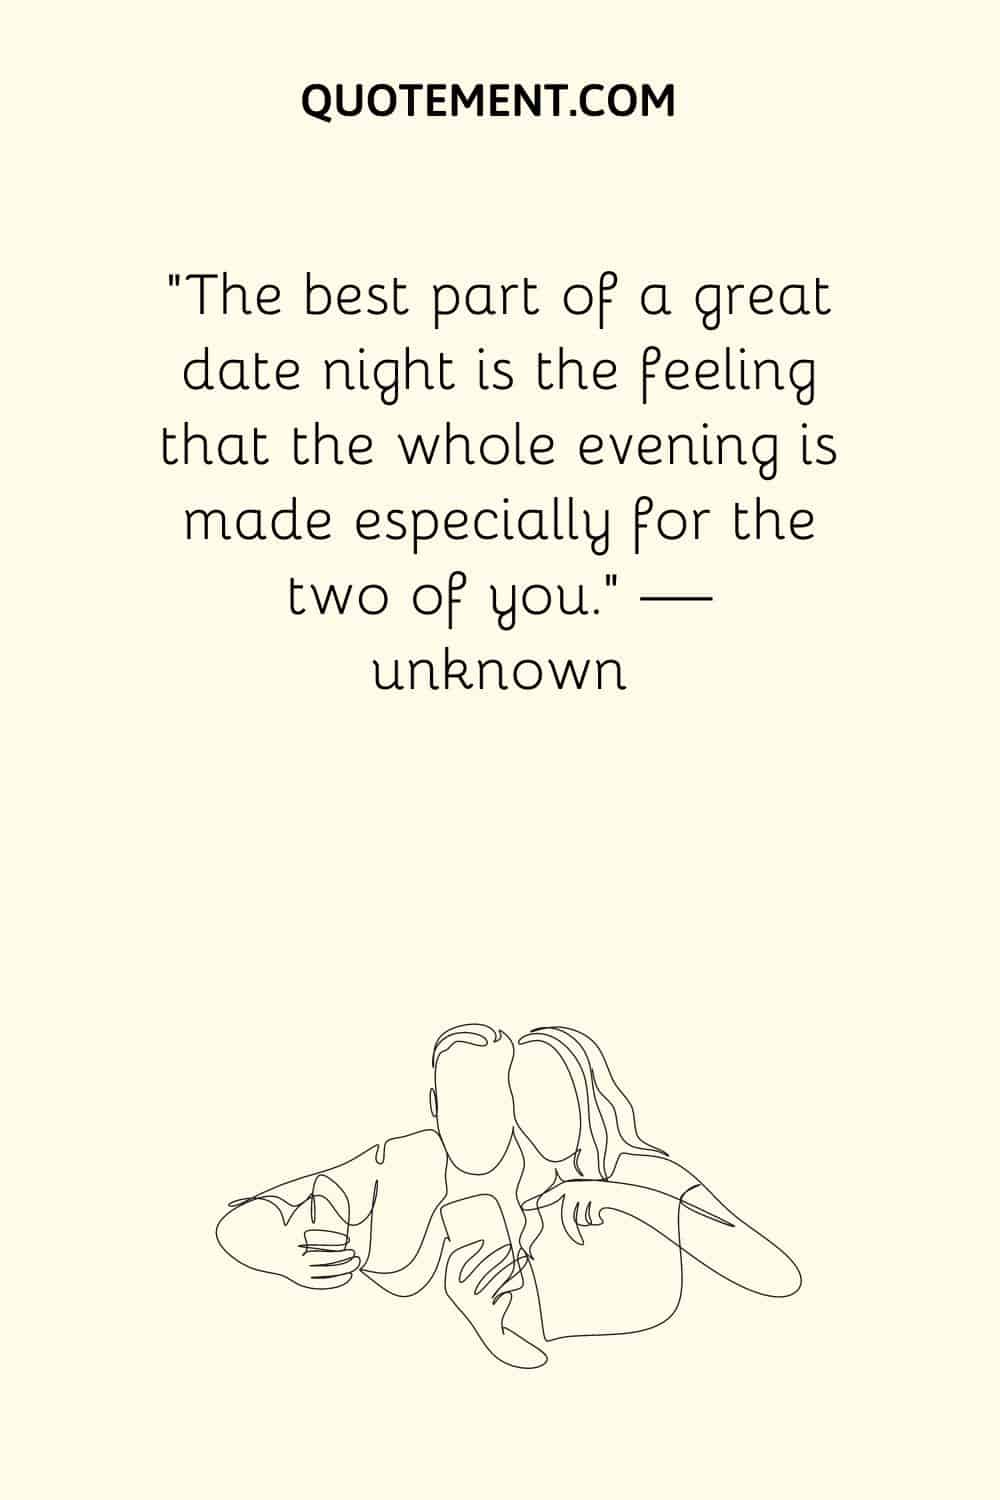 The best part of a great date night is the feeling that the whole evening is made especially for the two of you